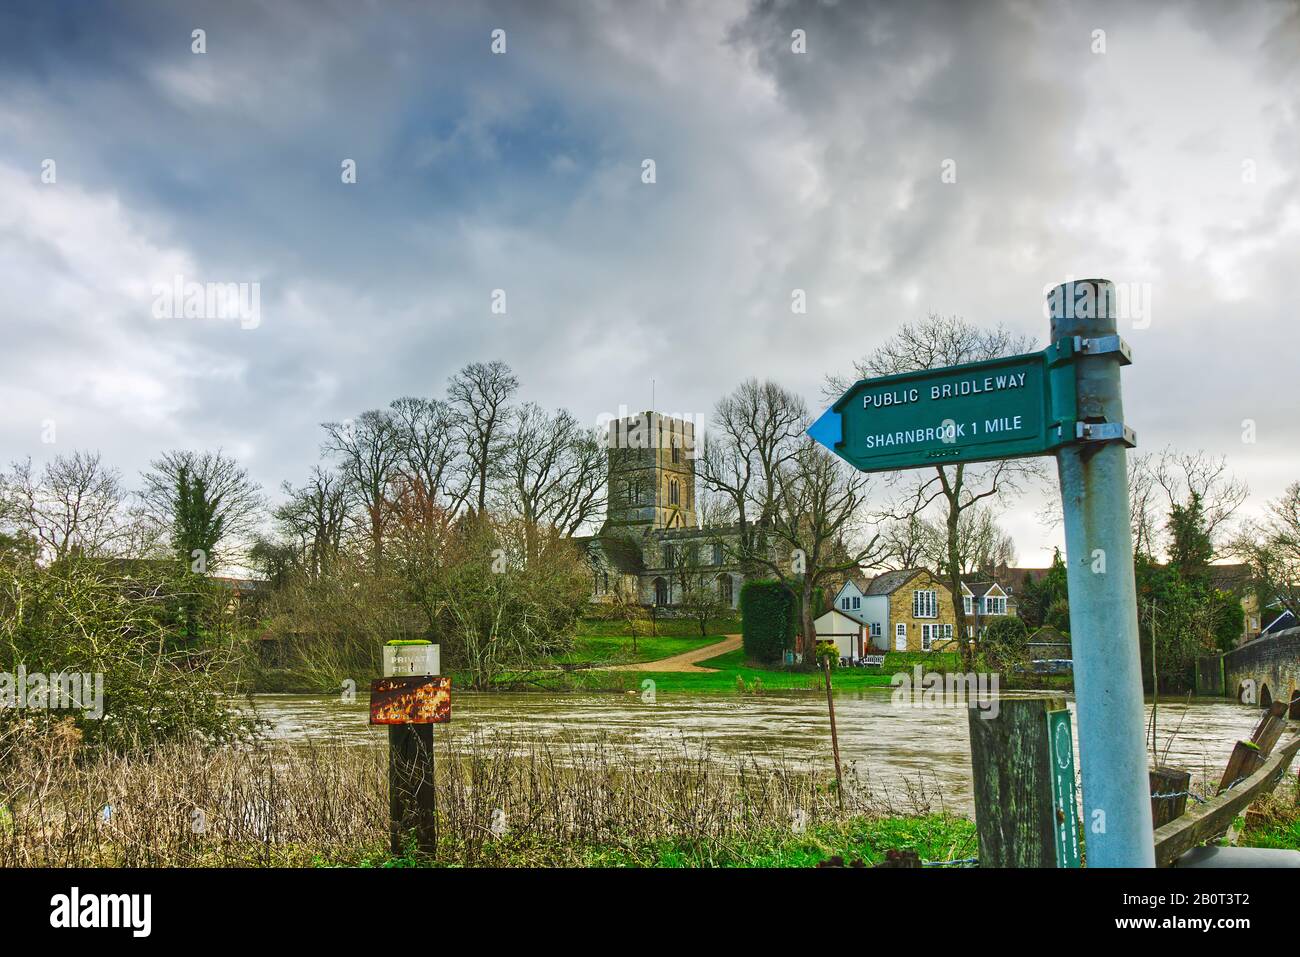 Signpost for public bridleway to Sharnbrook, Bedfordshire from Felmersham Bridge, with the River Great Ouse and St Mary's Church in the background Stock Photo